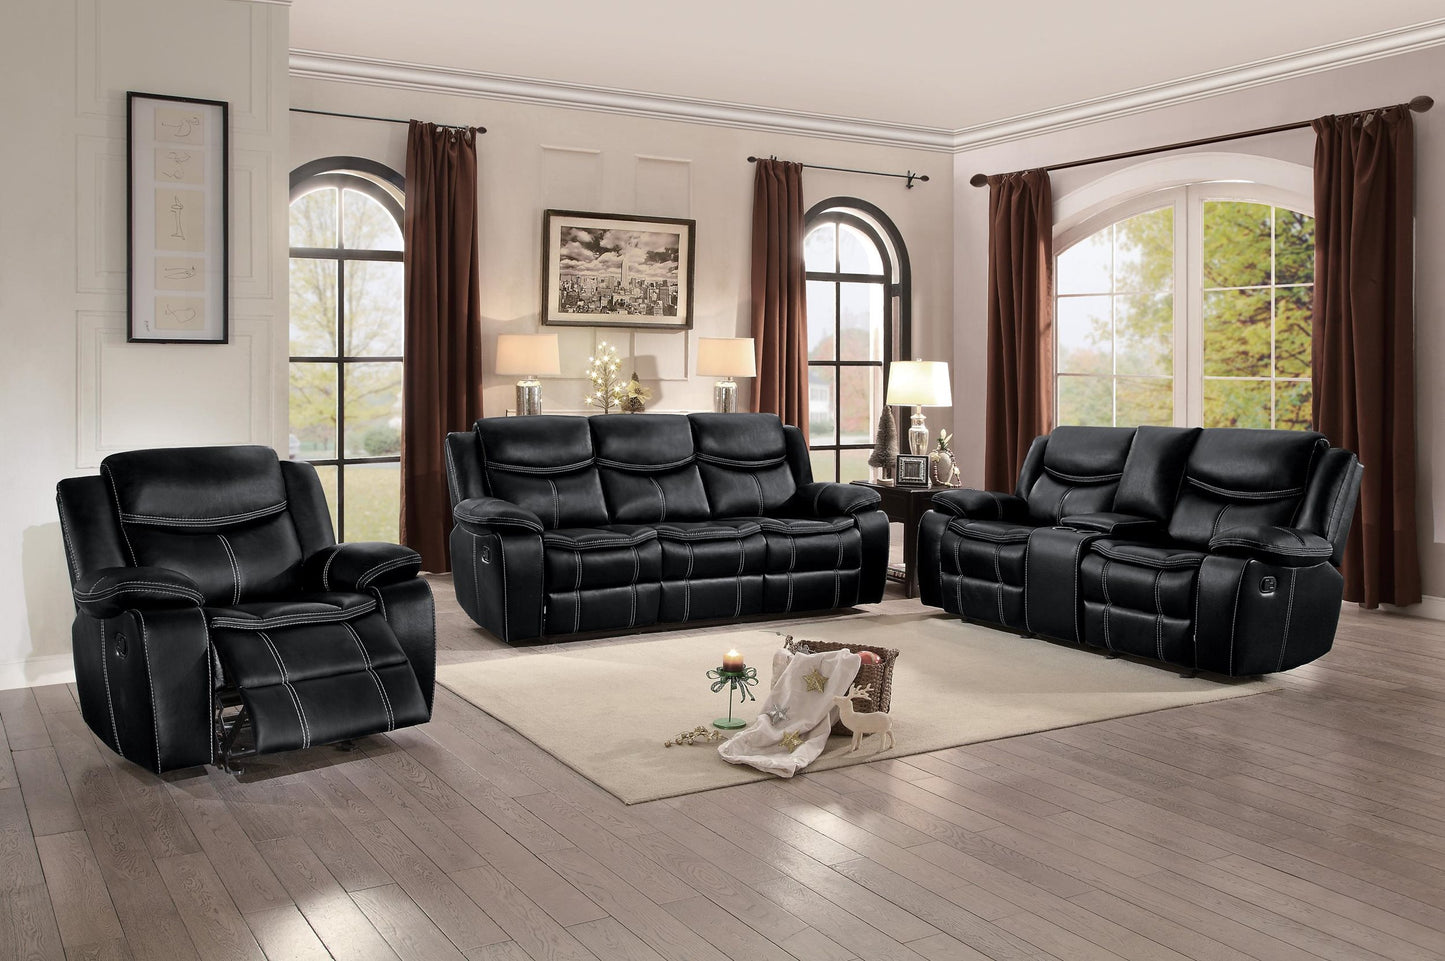 Homelegance Bastrop Double Glider Reclining Love Seat with Center Console in Leather - Black